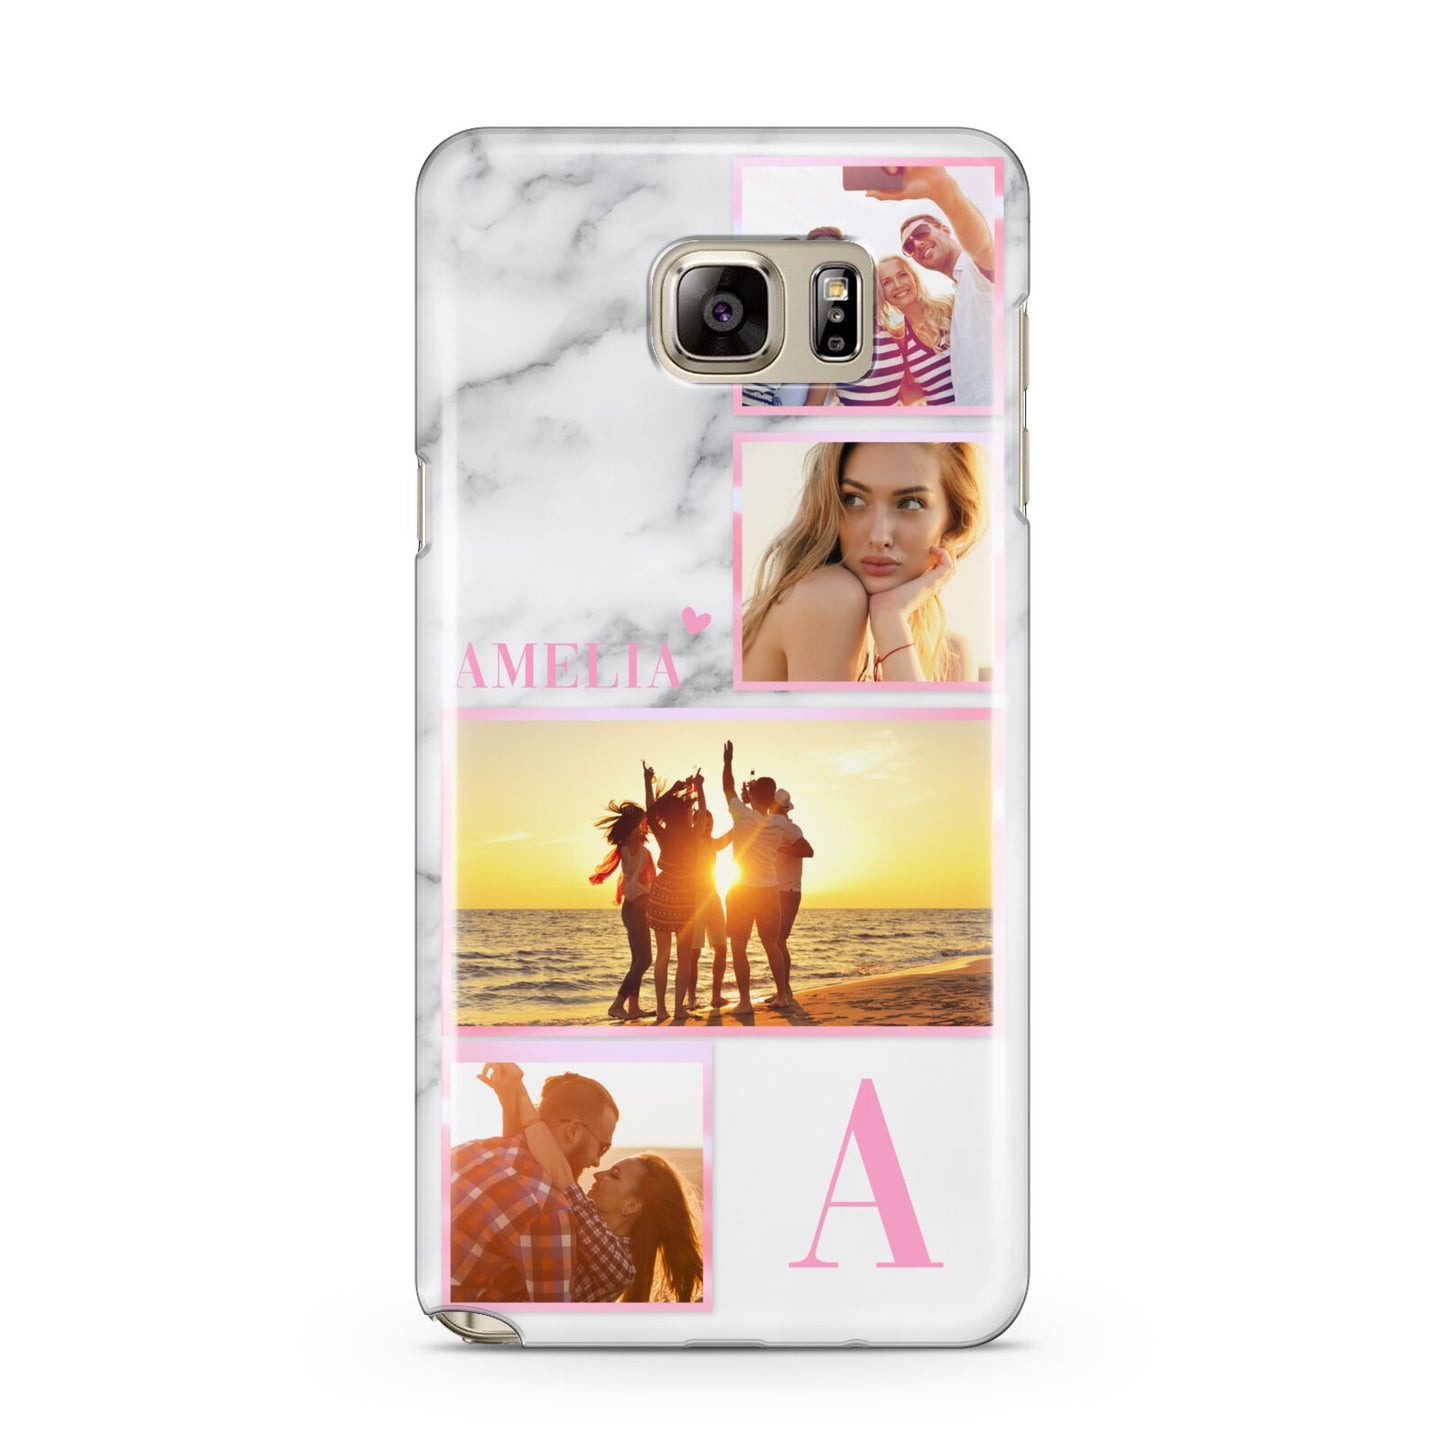 Personalised Marble Photo Collage Samsung Galaxy Note 5 Case